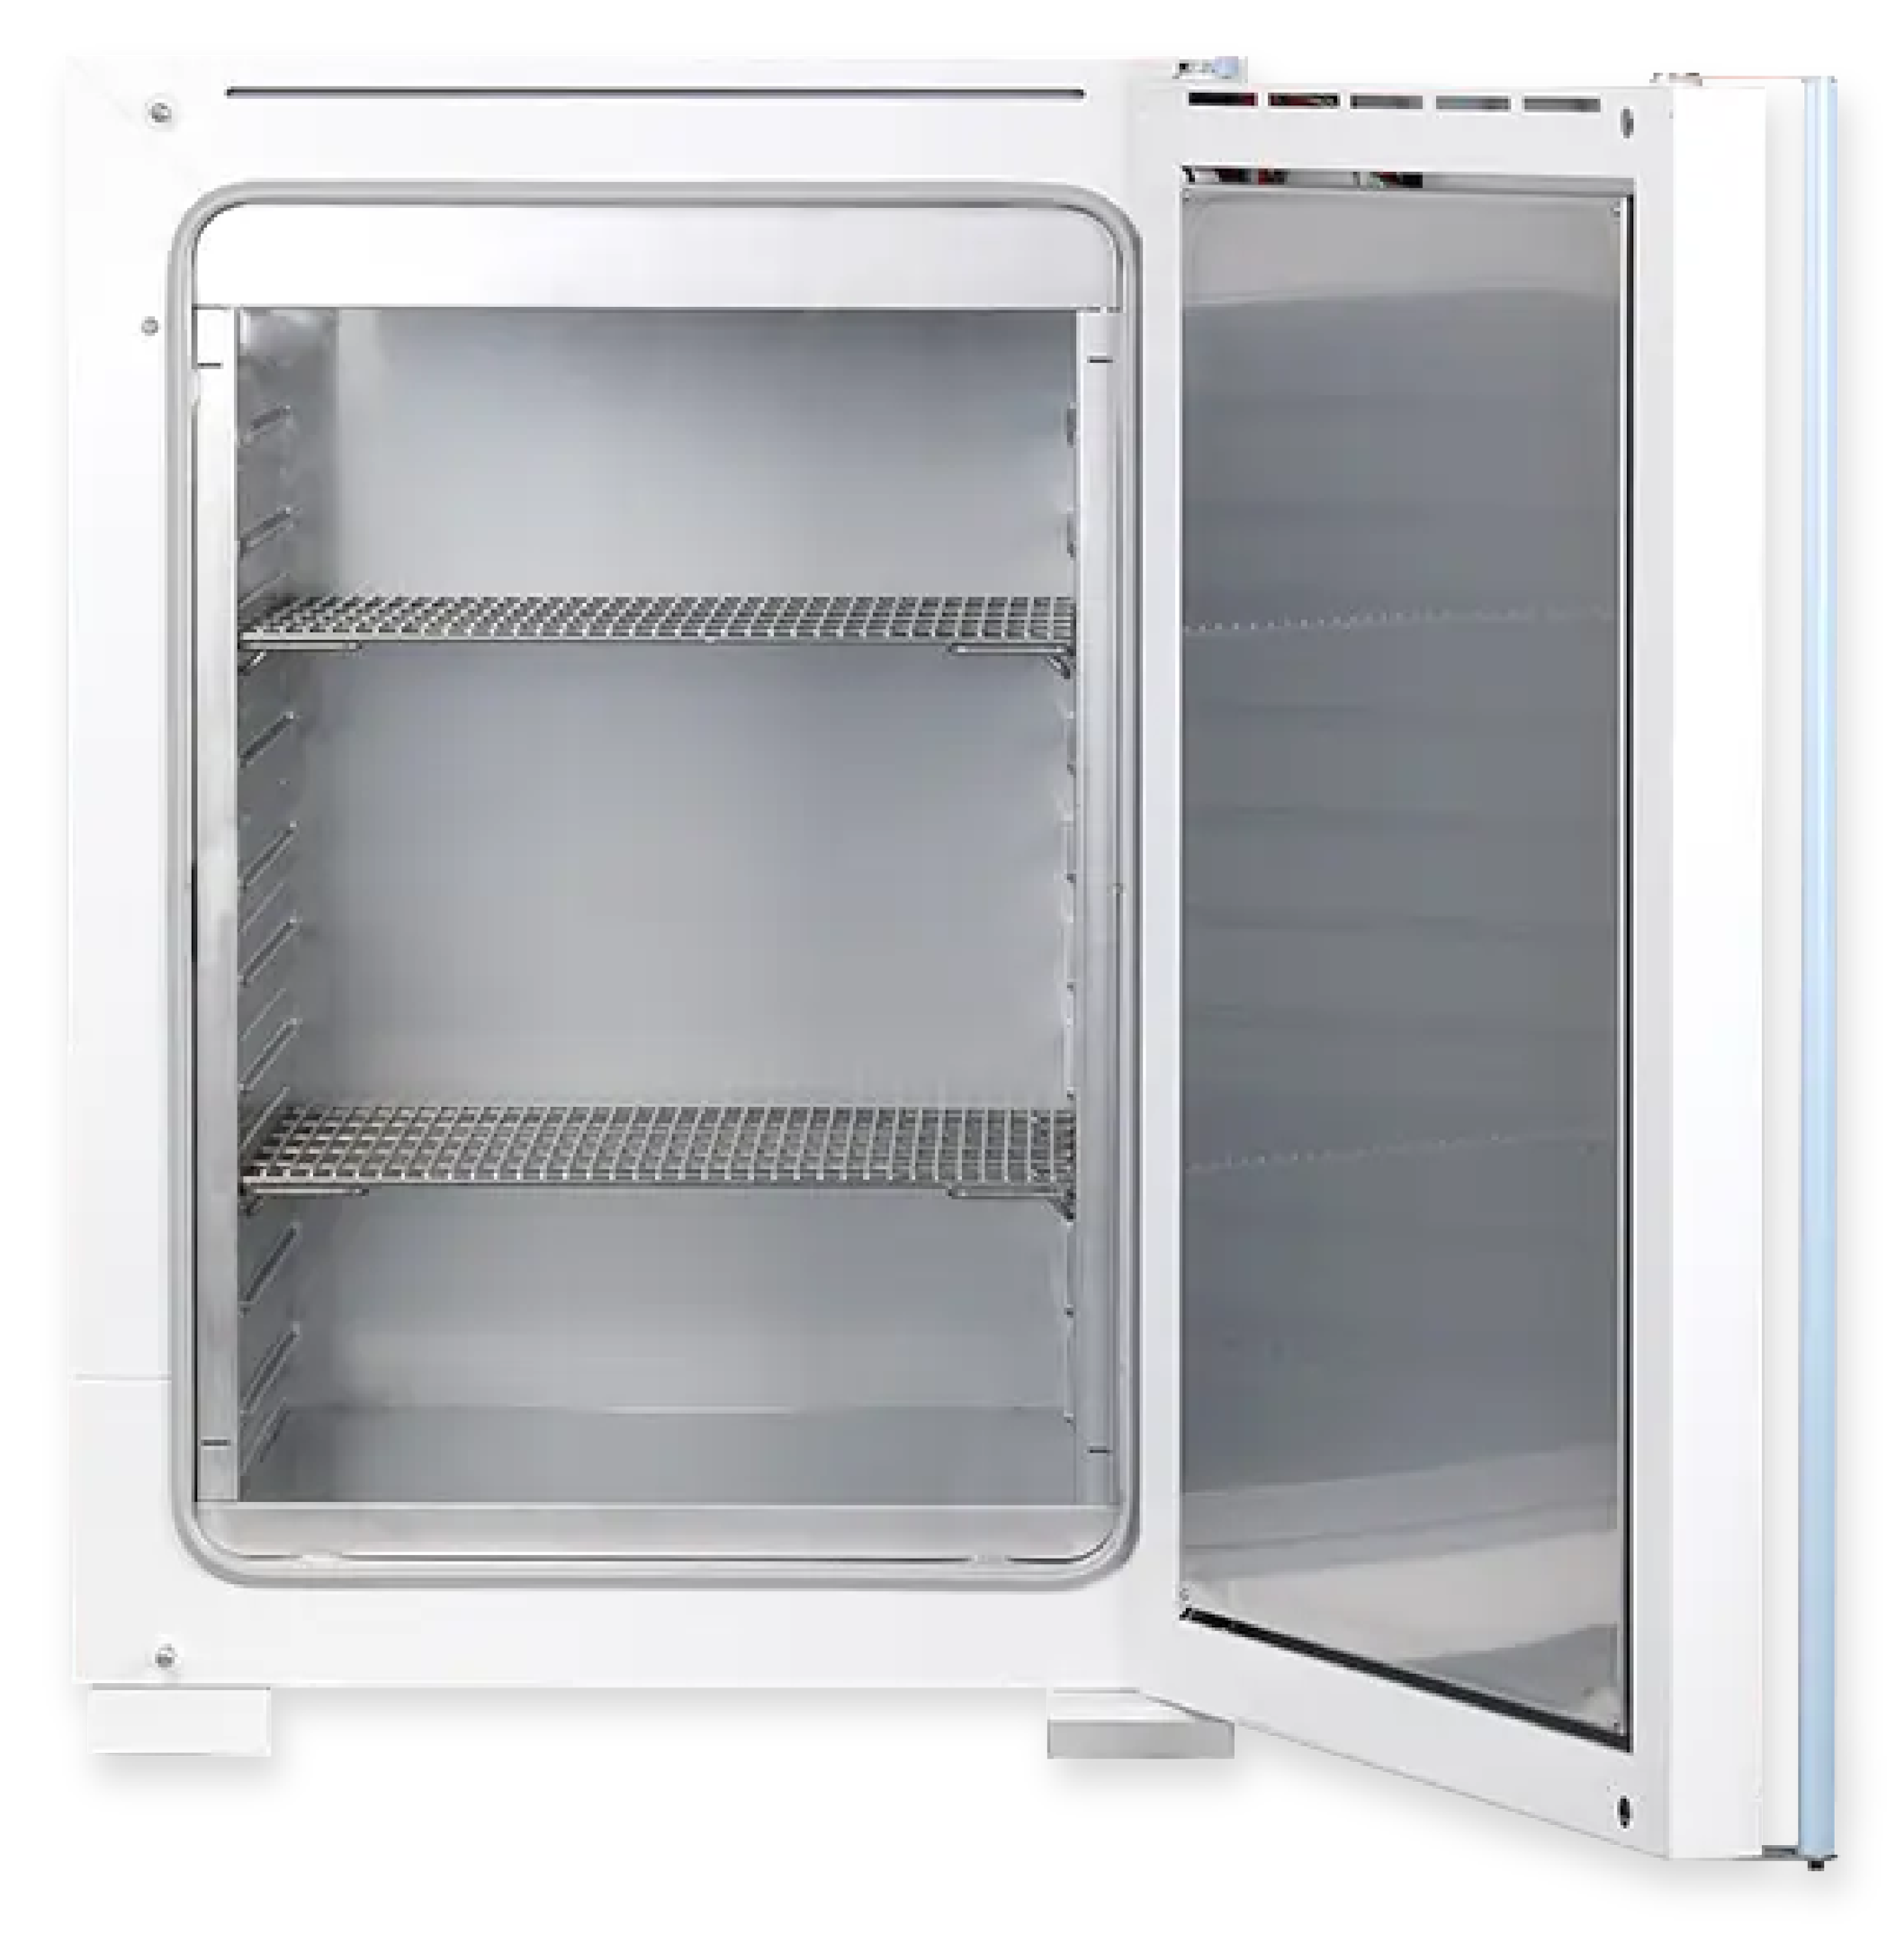 A picture of a gravity convection oven with a stainless steel inner chamber and perforated stainless steel shelves